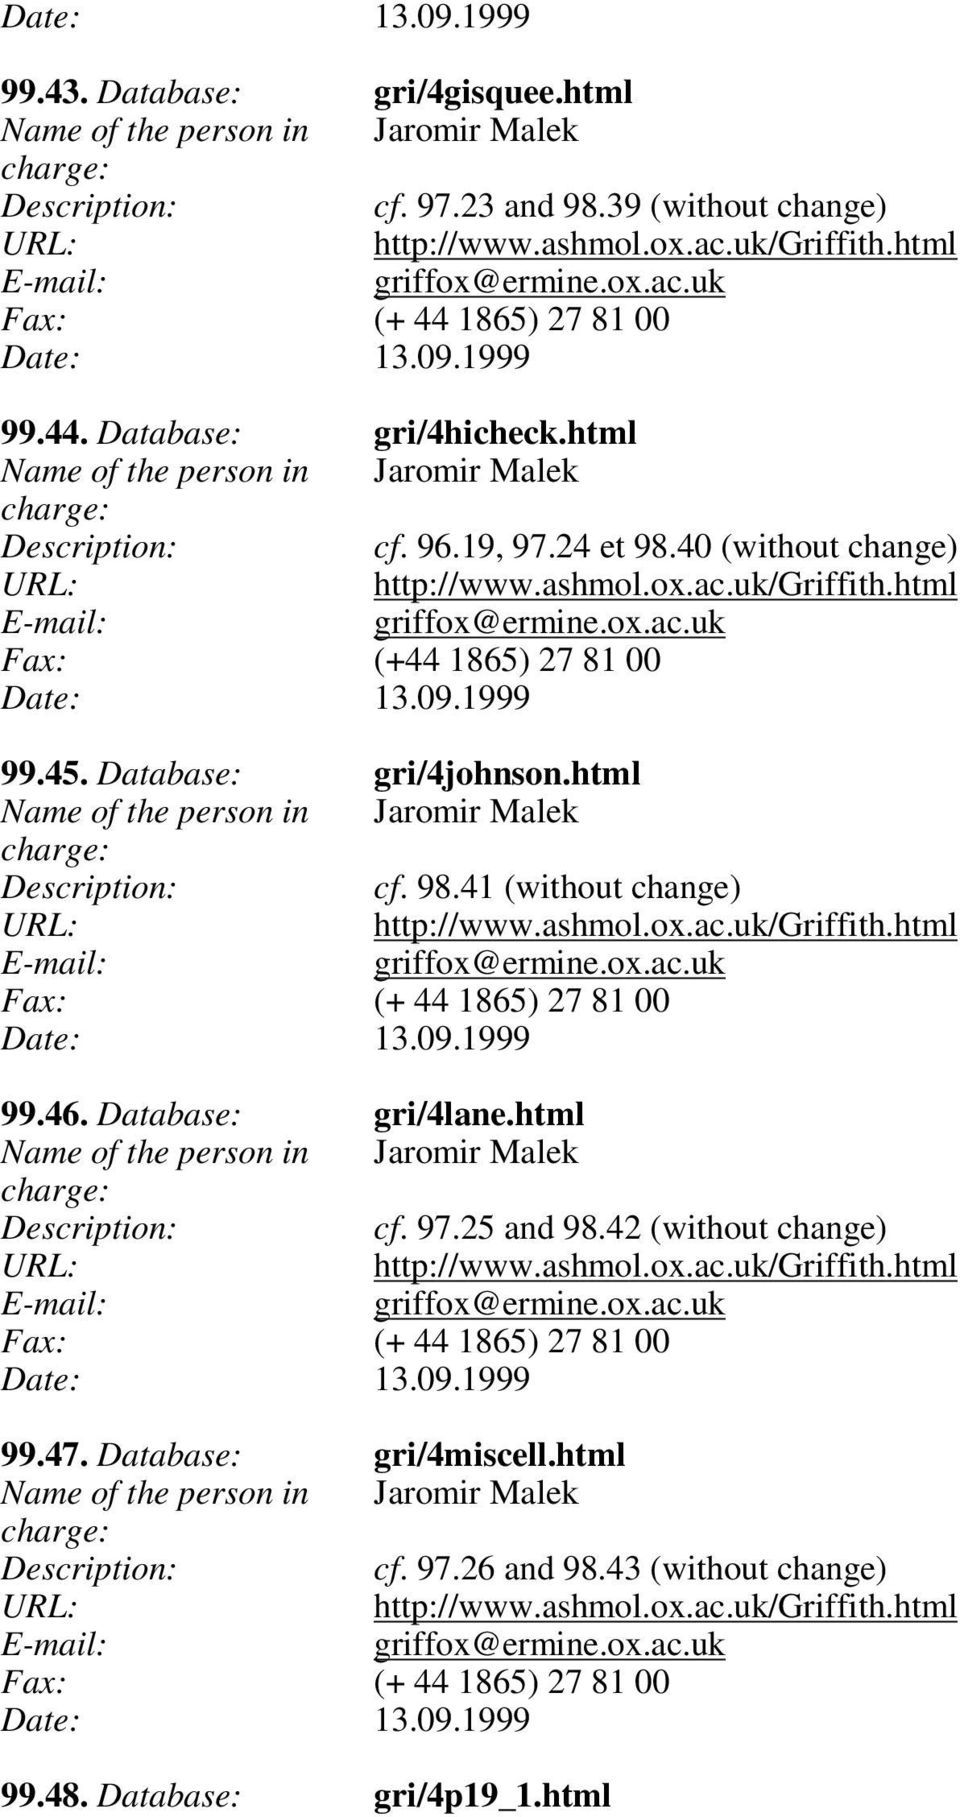 09.1999 99.45. Database: gri/4johnson.html Name of the person in Jaromir Malek cf. 98.41 (without change) http://www.ashmol.ox.ac.uk/griffith.html griffox@ermine.ox.ac.uk Fax: (+ 44 1865) 27 81 00 Date: 13.